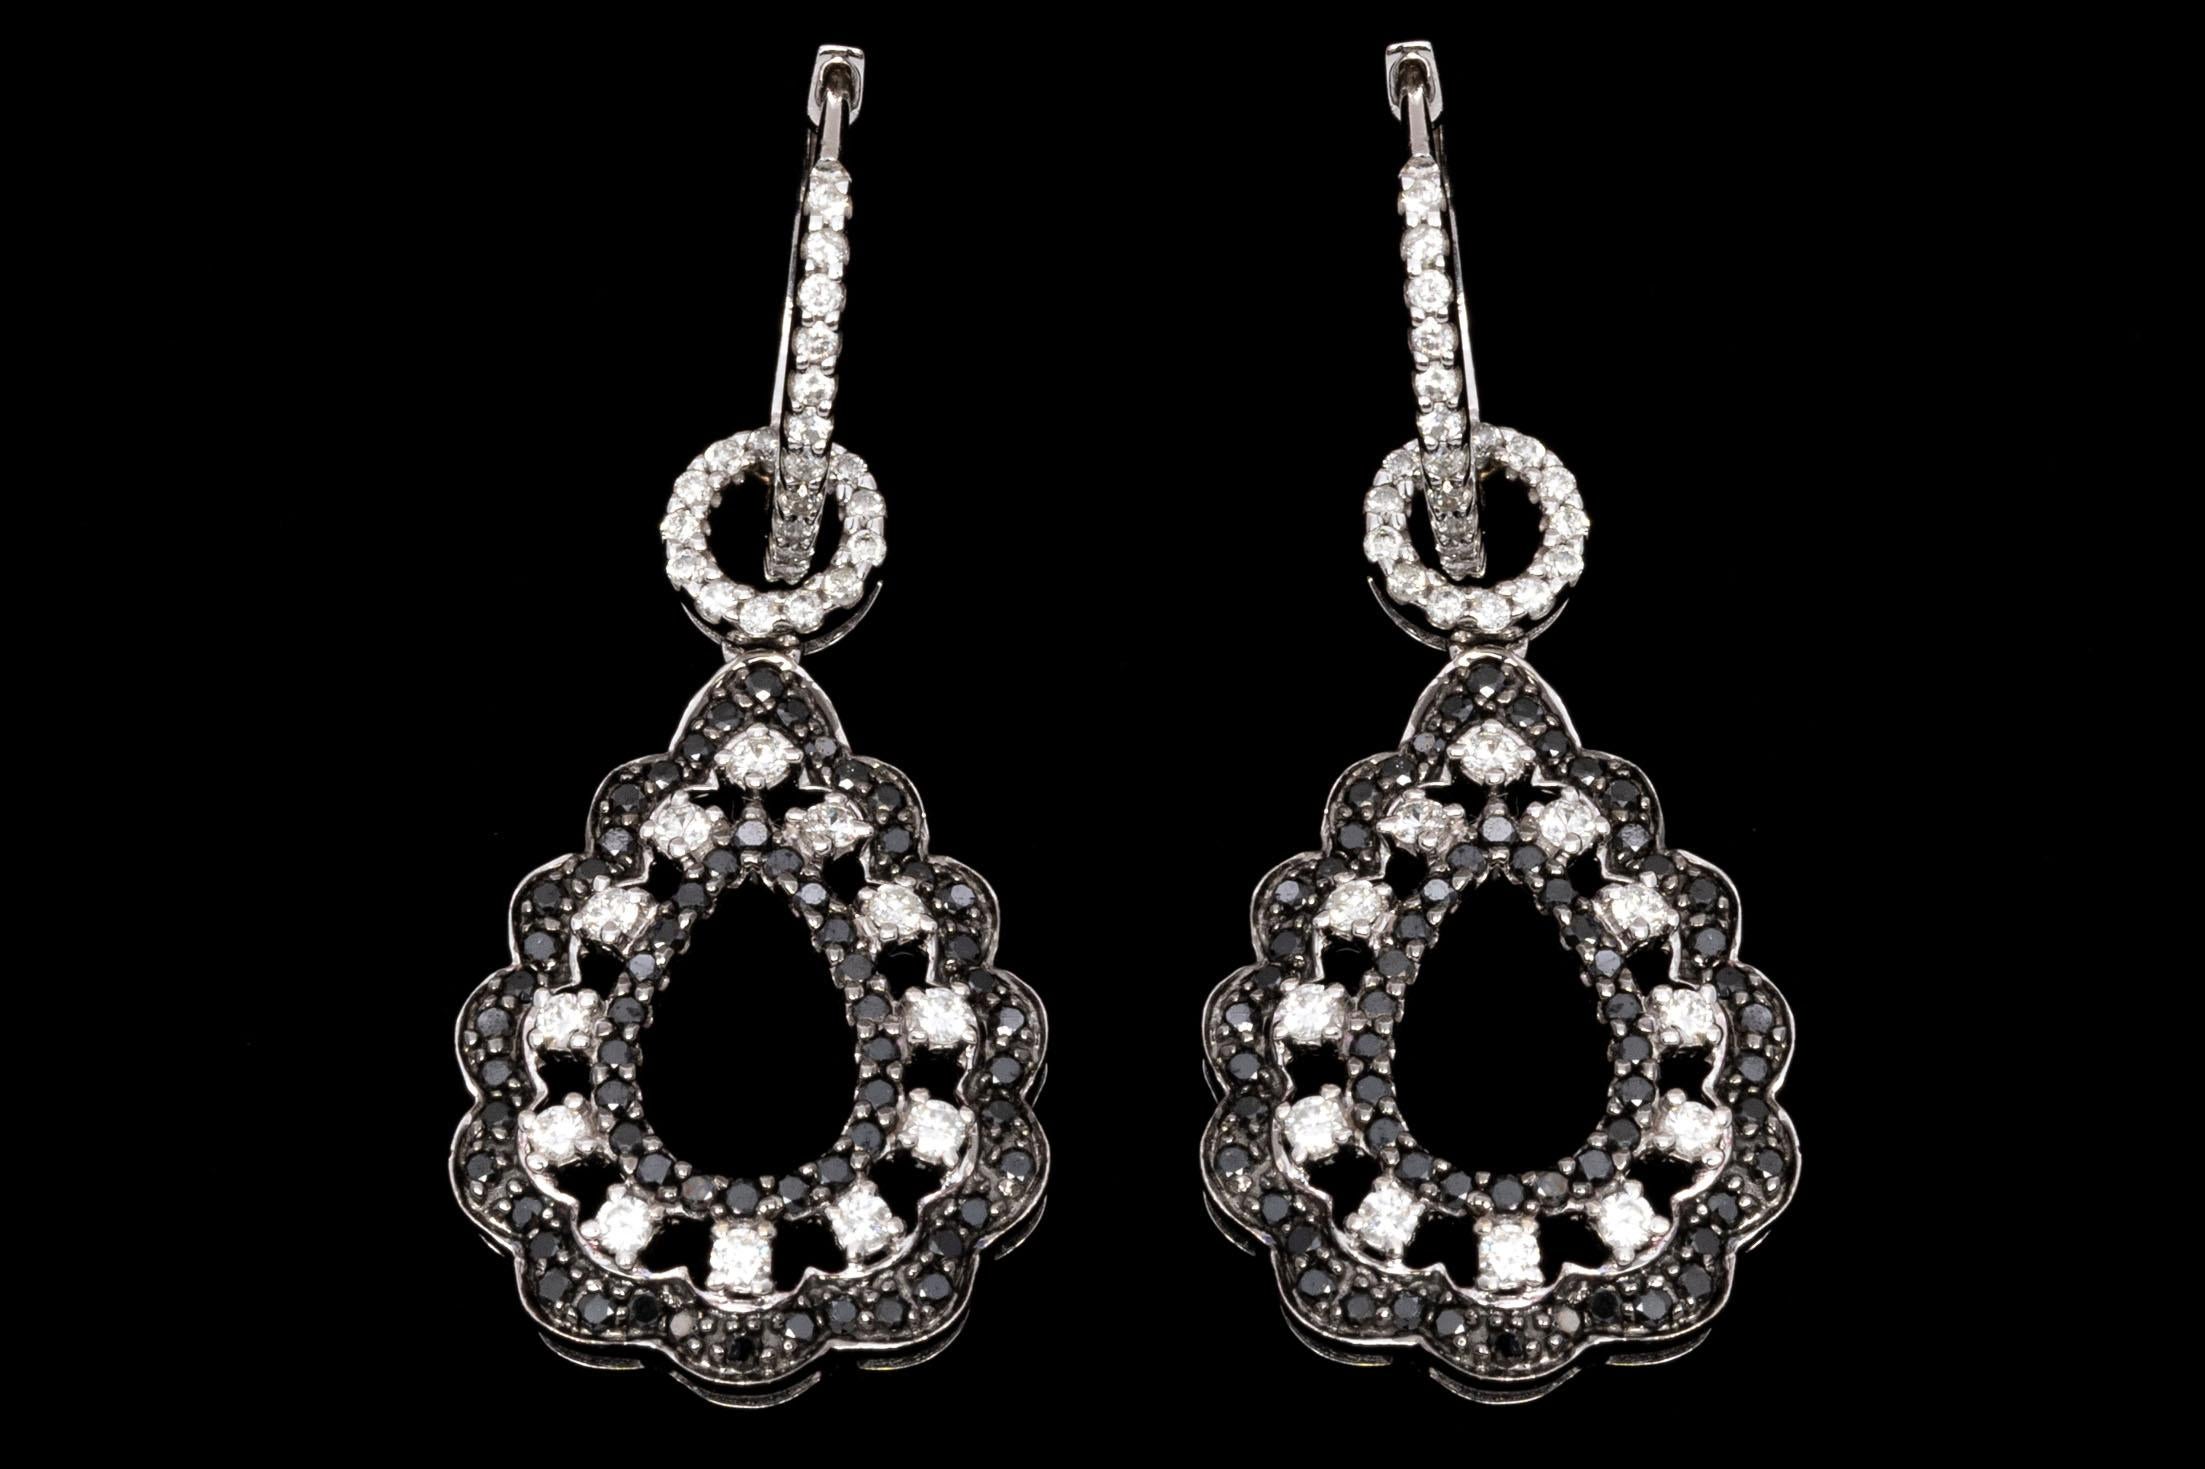 14k Fabulous Black and White Diamond Pear Scalloped Pendant Earrings, 1.97 TCW In Good Condition For Sale In Southport, CT